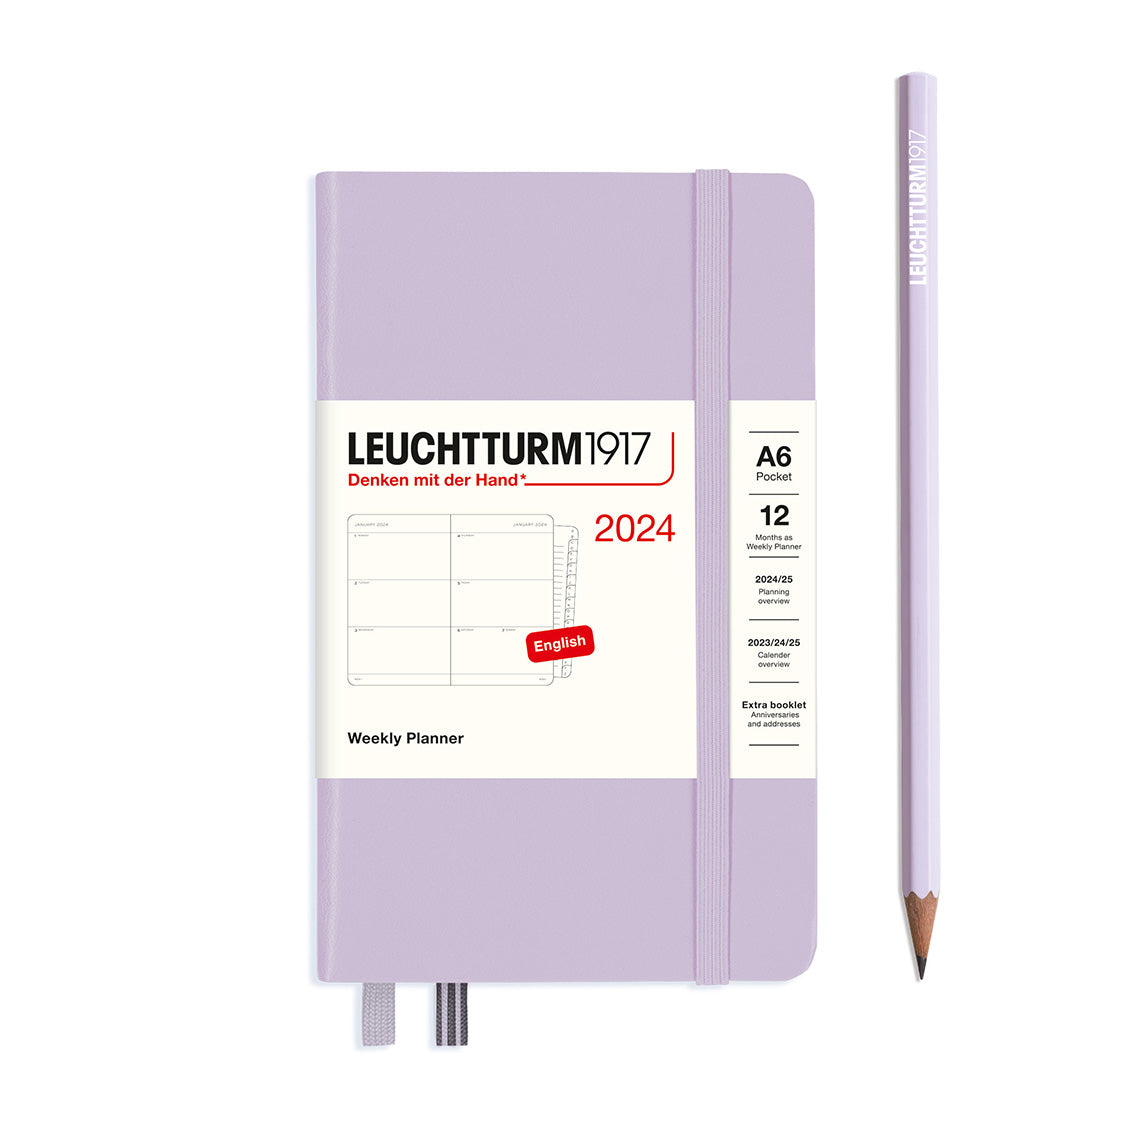 An image of a lilac planner with a lilac elastic band holding it together and a cream paper wrap around the middle stating the business name Leuchtturm1917, that it is for the year 2024, it is a weekly planner, is A6 in size and an English language version. It has an image on the wrap showing the inside layout which is a week spread across 2 pages. A lilac pencil is shown at the side of the planner.